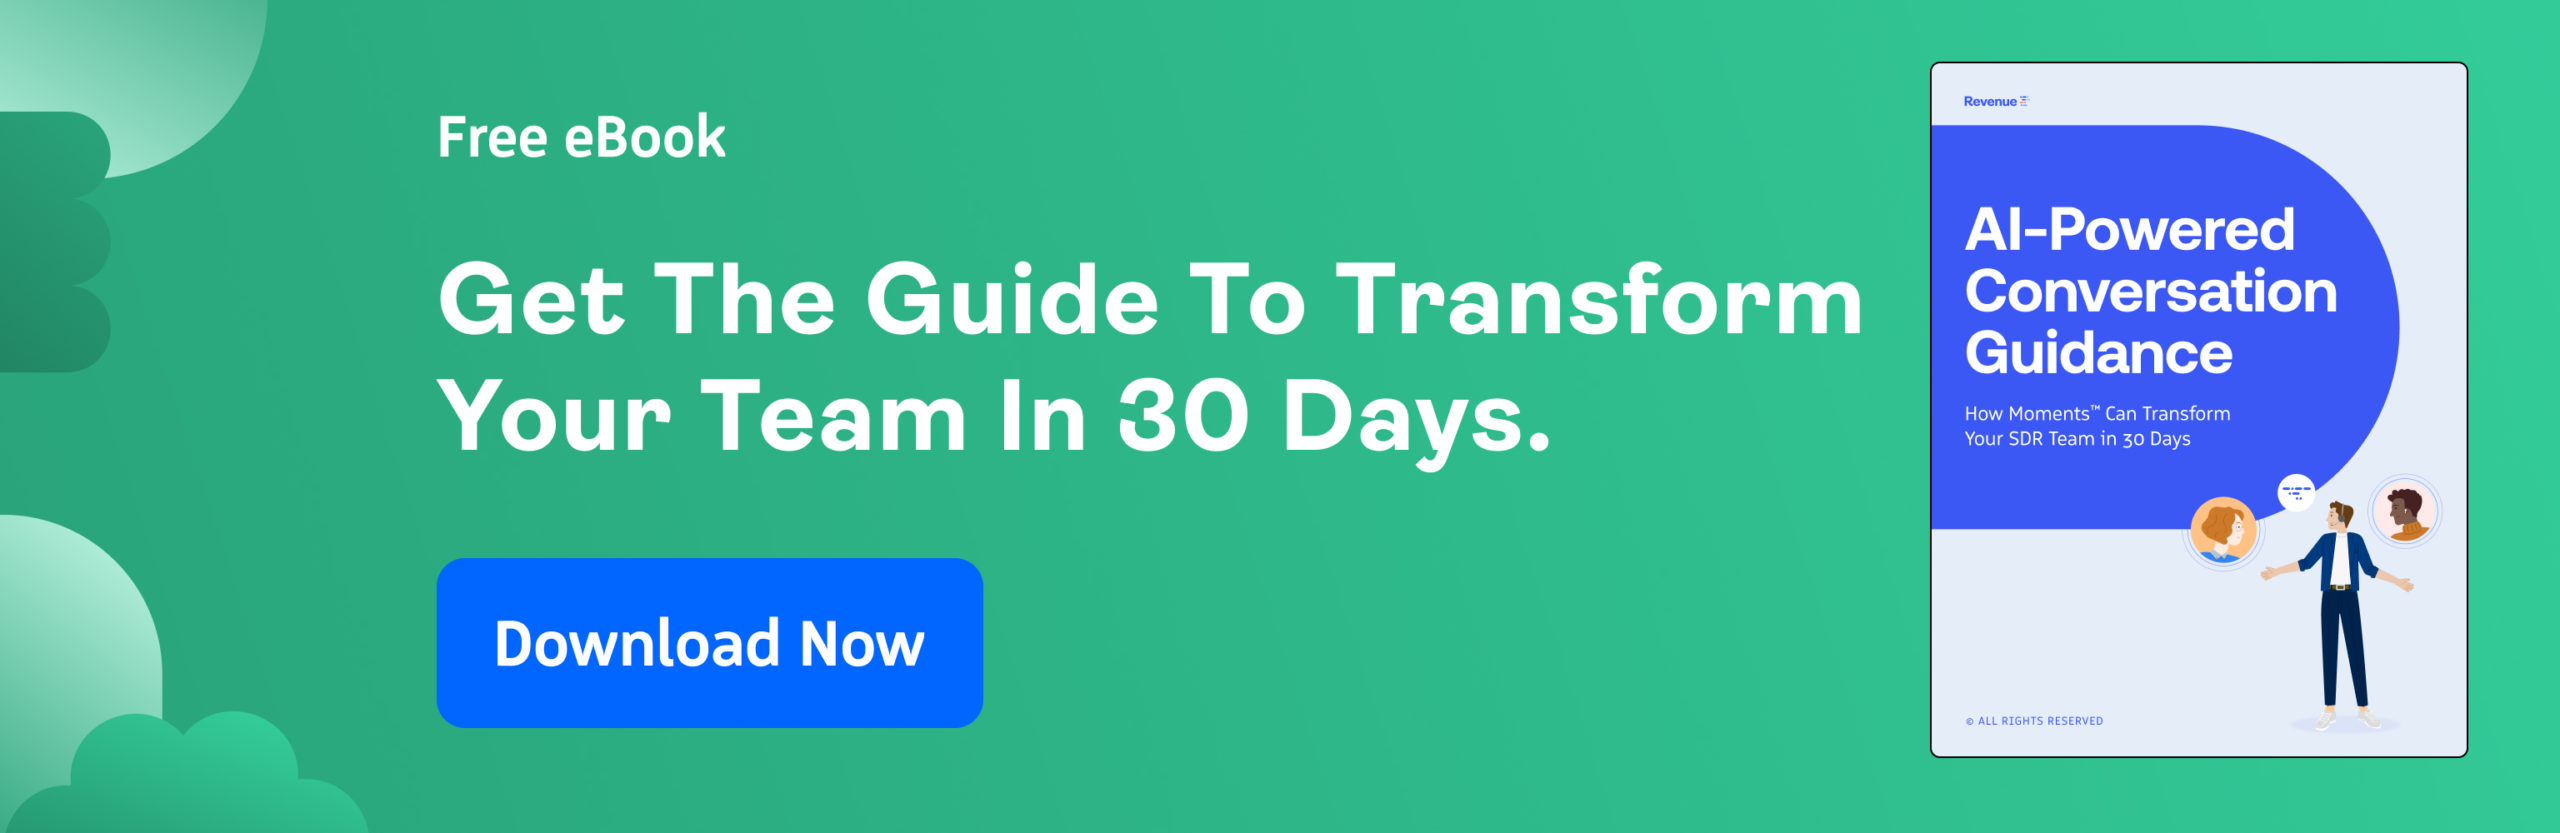 Get the AI-Powered Conversation Intelligence Guide to Transform Your Team in 30 Days.